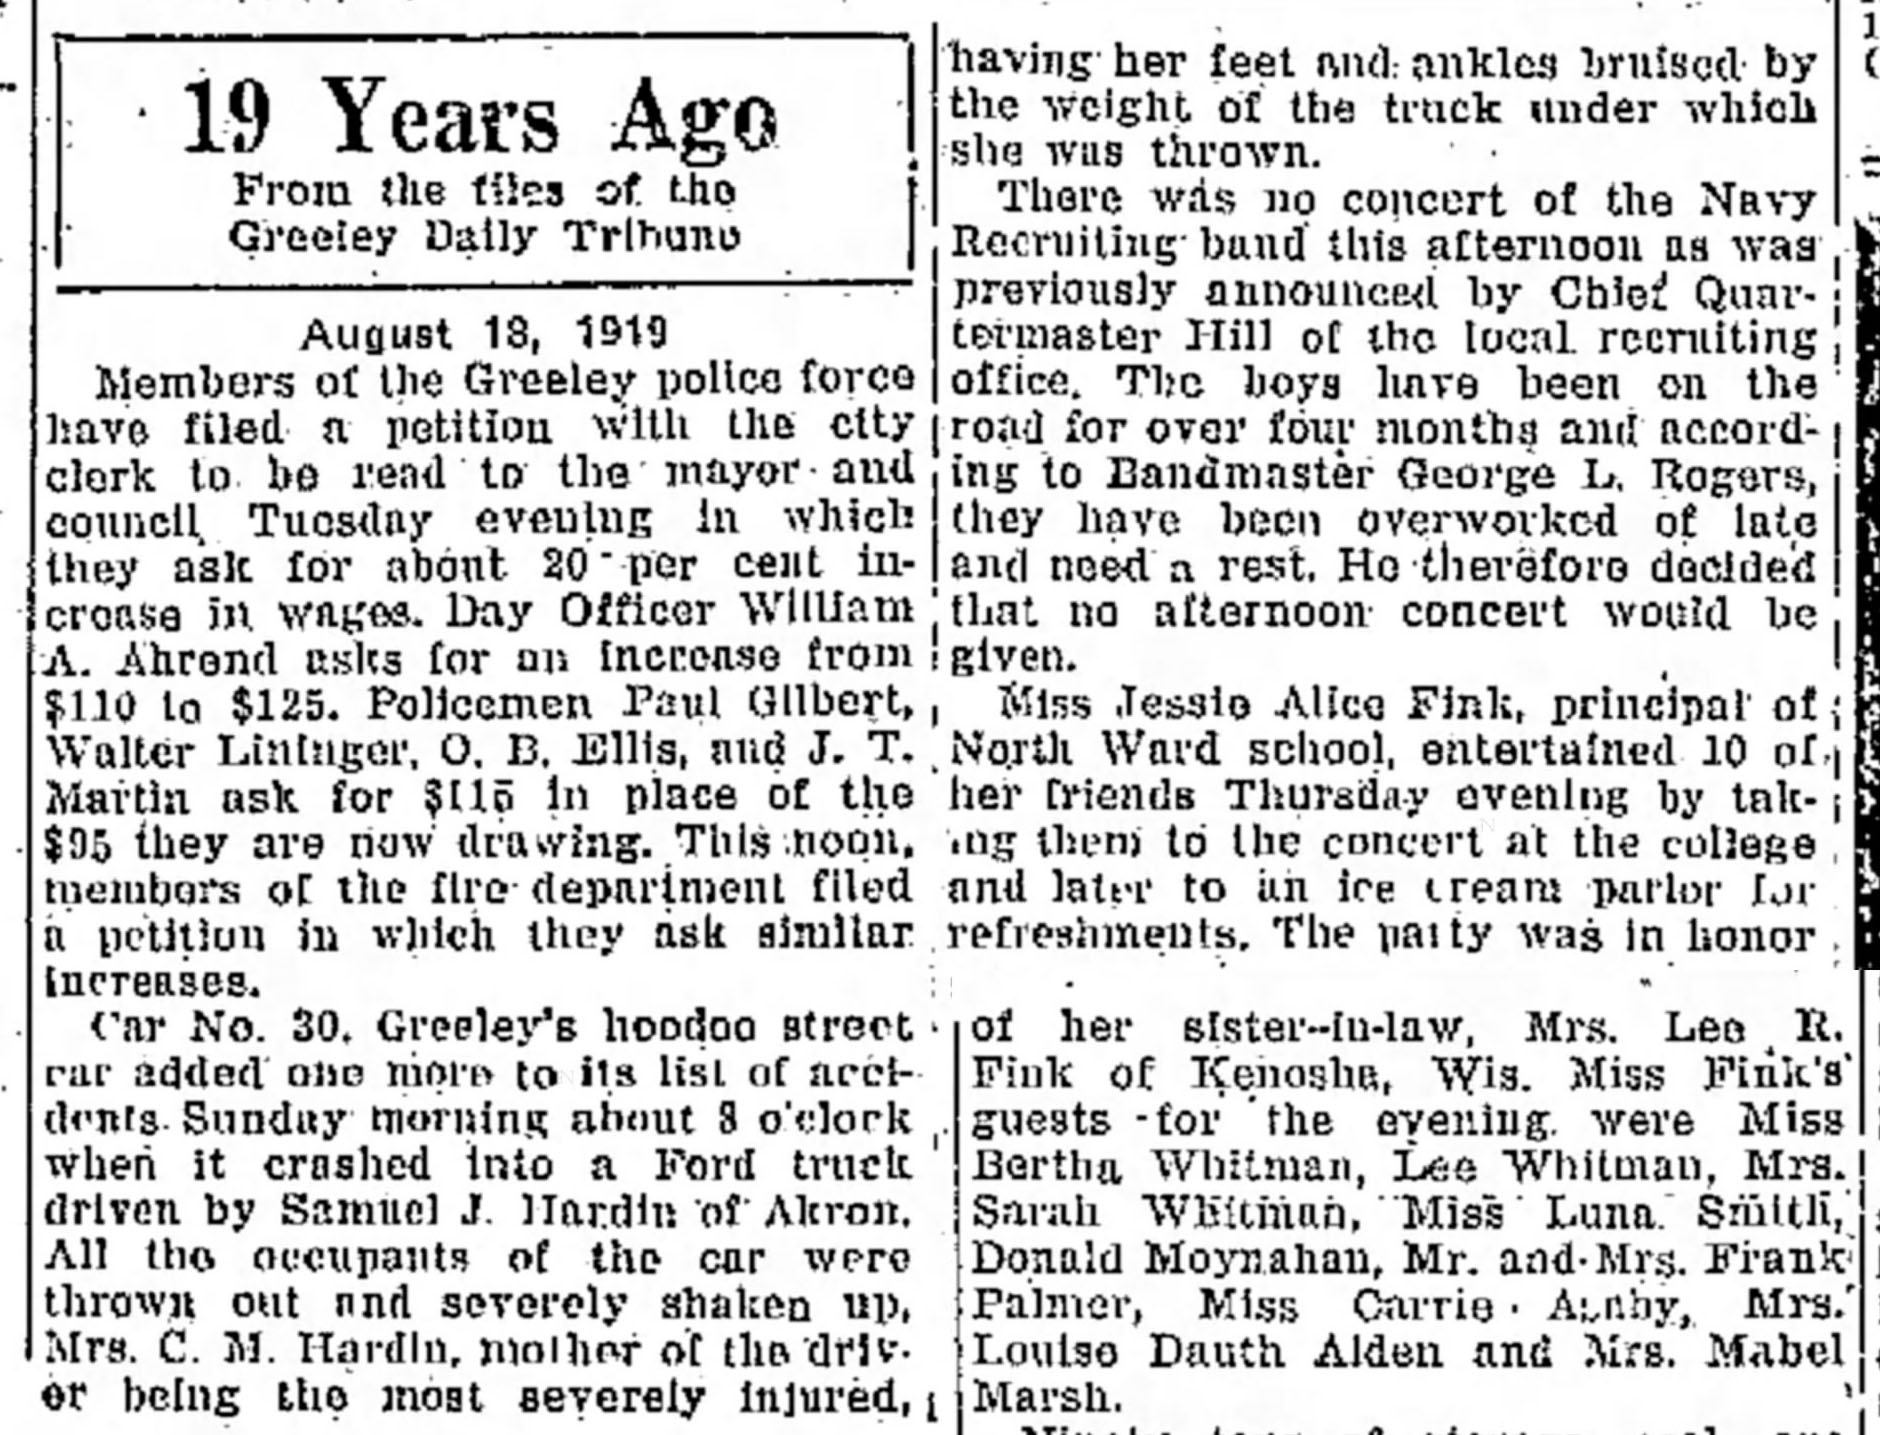 Dauth Family Archive - 1938-08-18 - Greeley Daily Tribune - Louise Dauth At Get Together